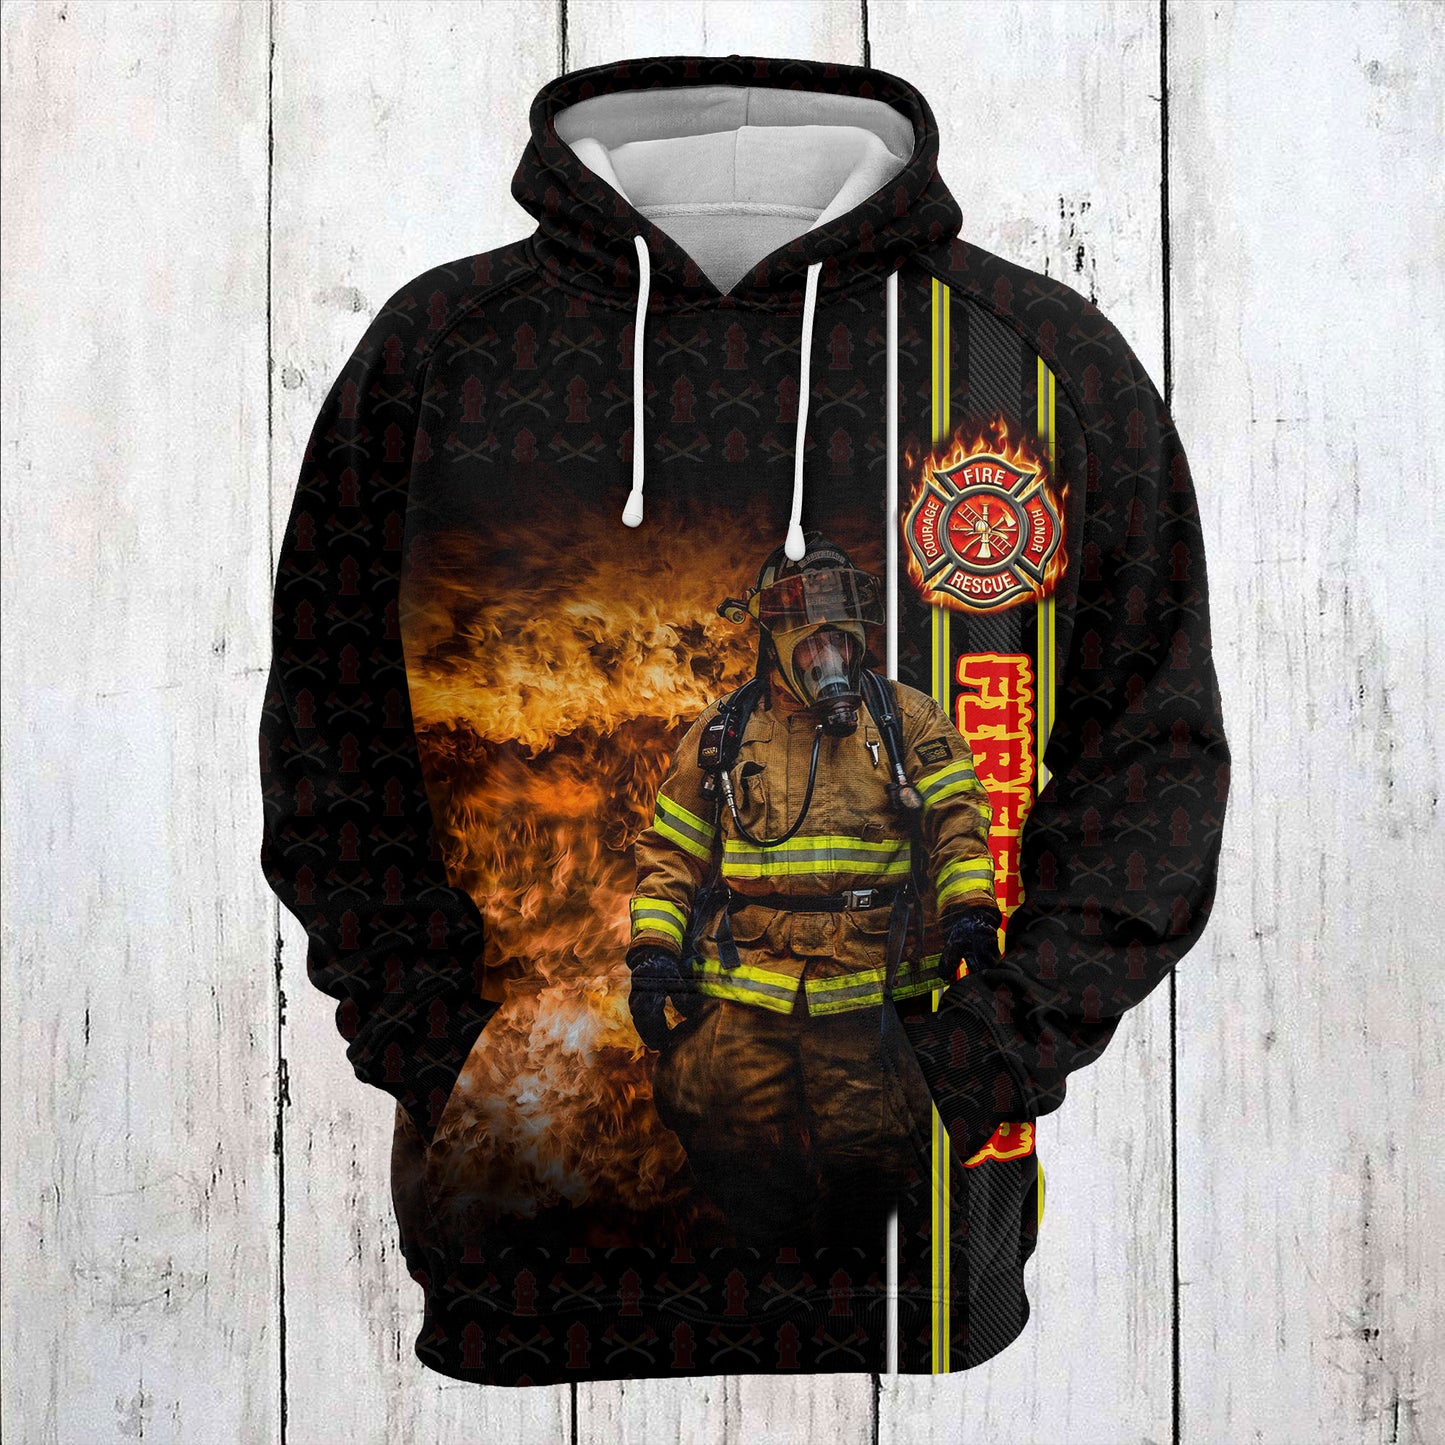 Firefighter Sarcasm TY0712 unisex womens & mens, couples matching, friends, funny family sublimation 3D hoodie christmas holiday gifts (plus size available)